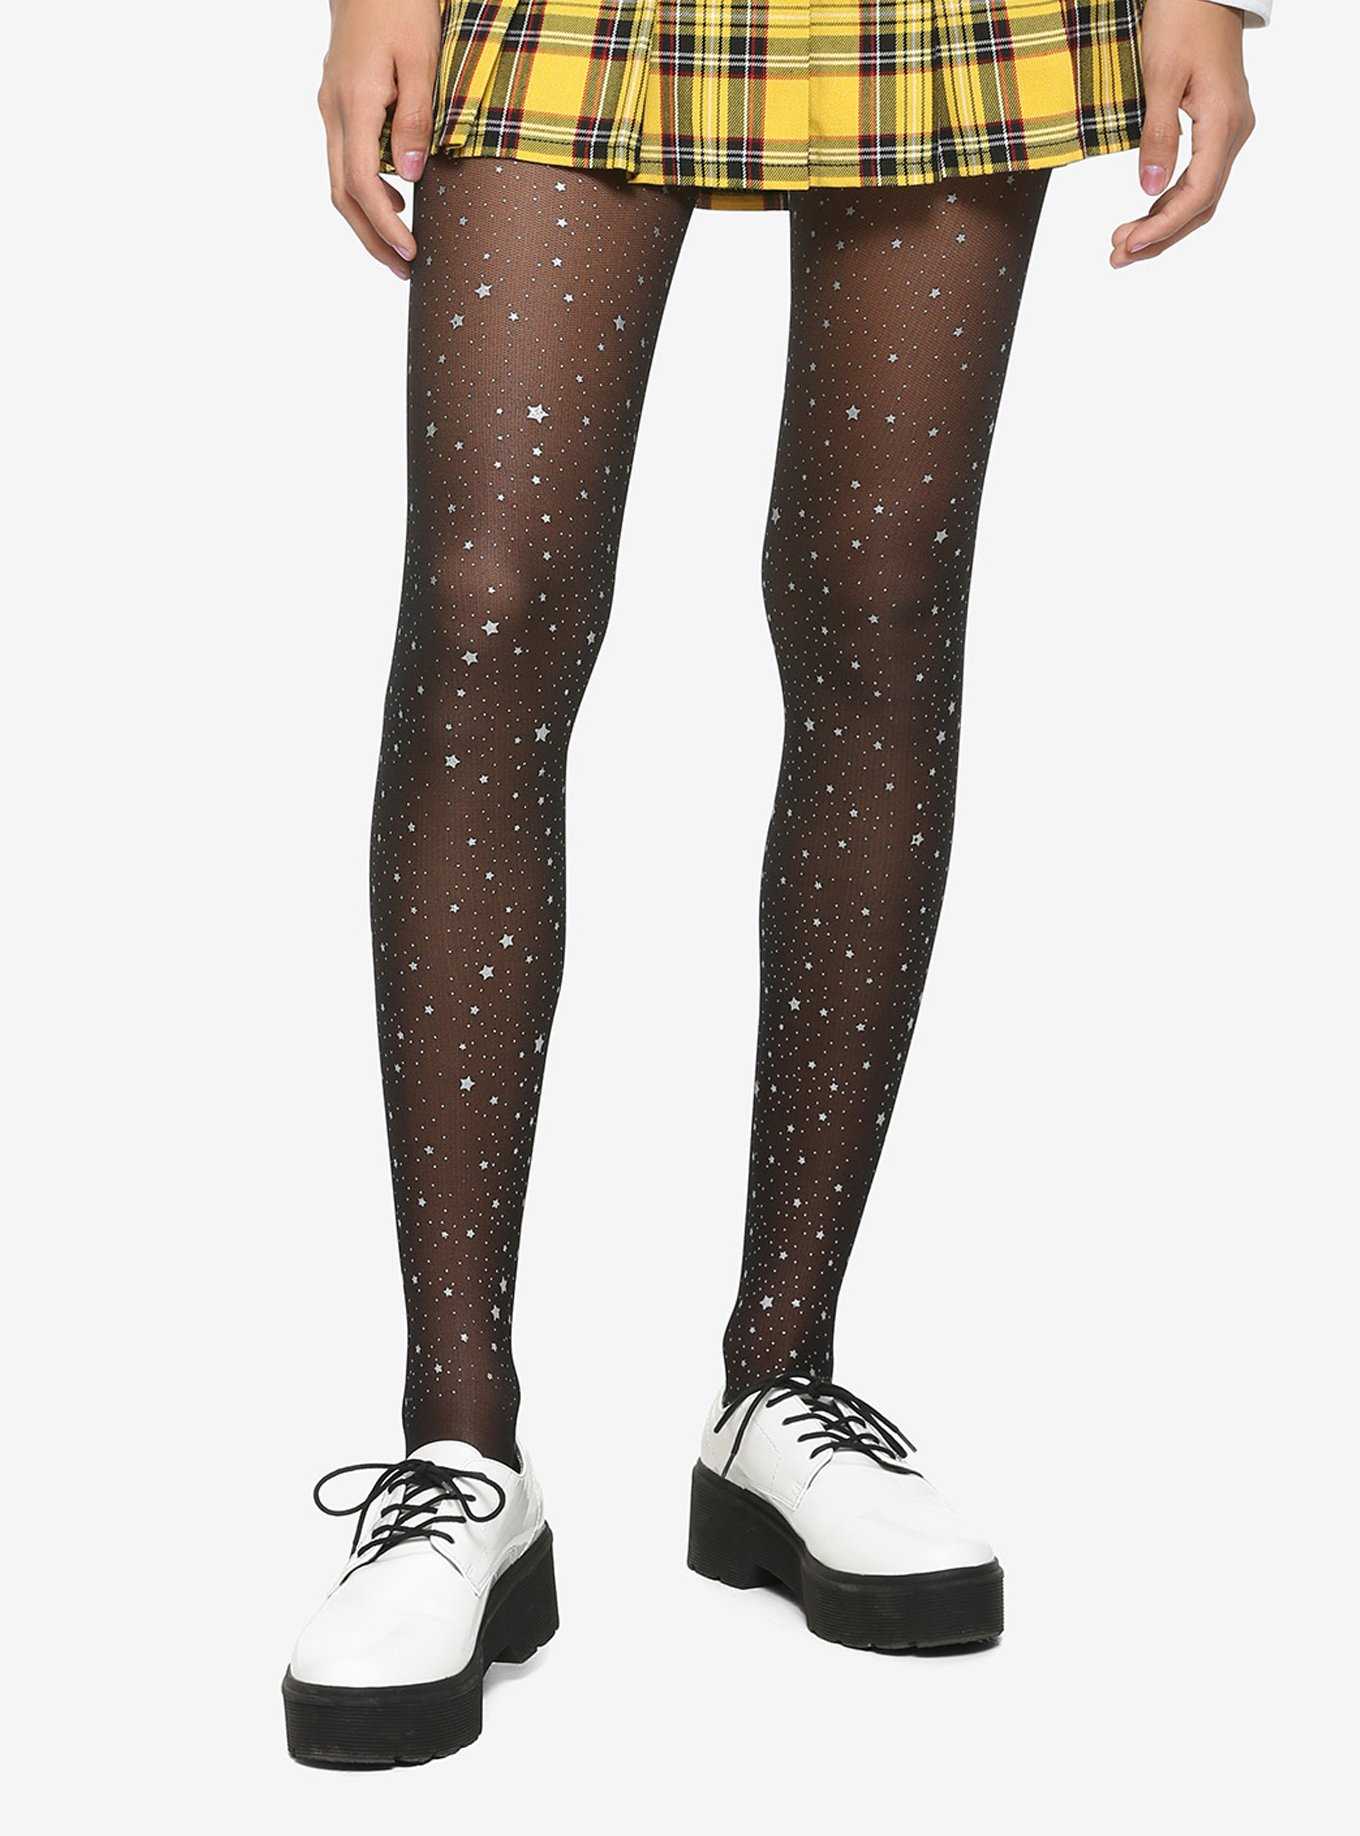 Black Silver Glitter Dot Sheer Tights Plus Size Women's Fashion Tights  Patterned Tights -  Canada